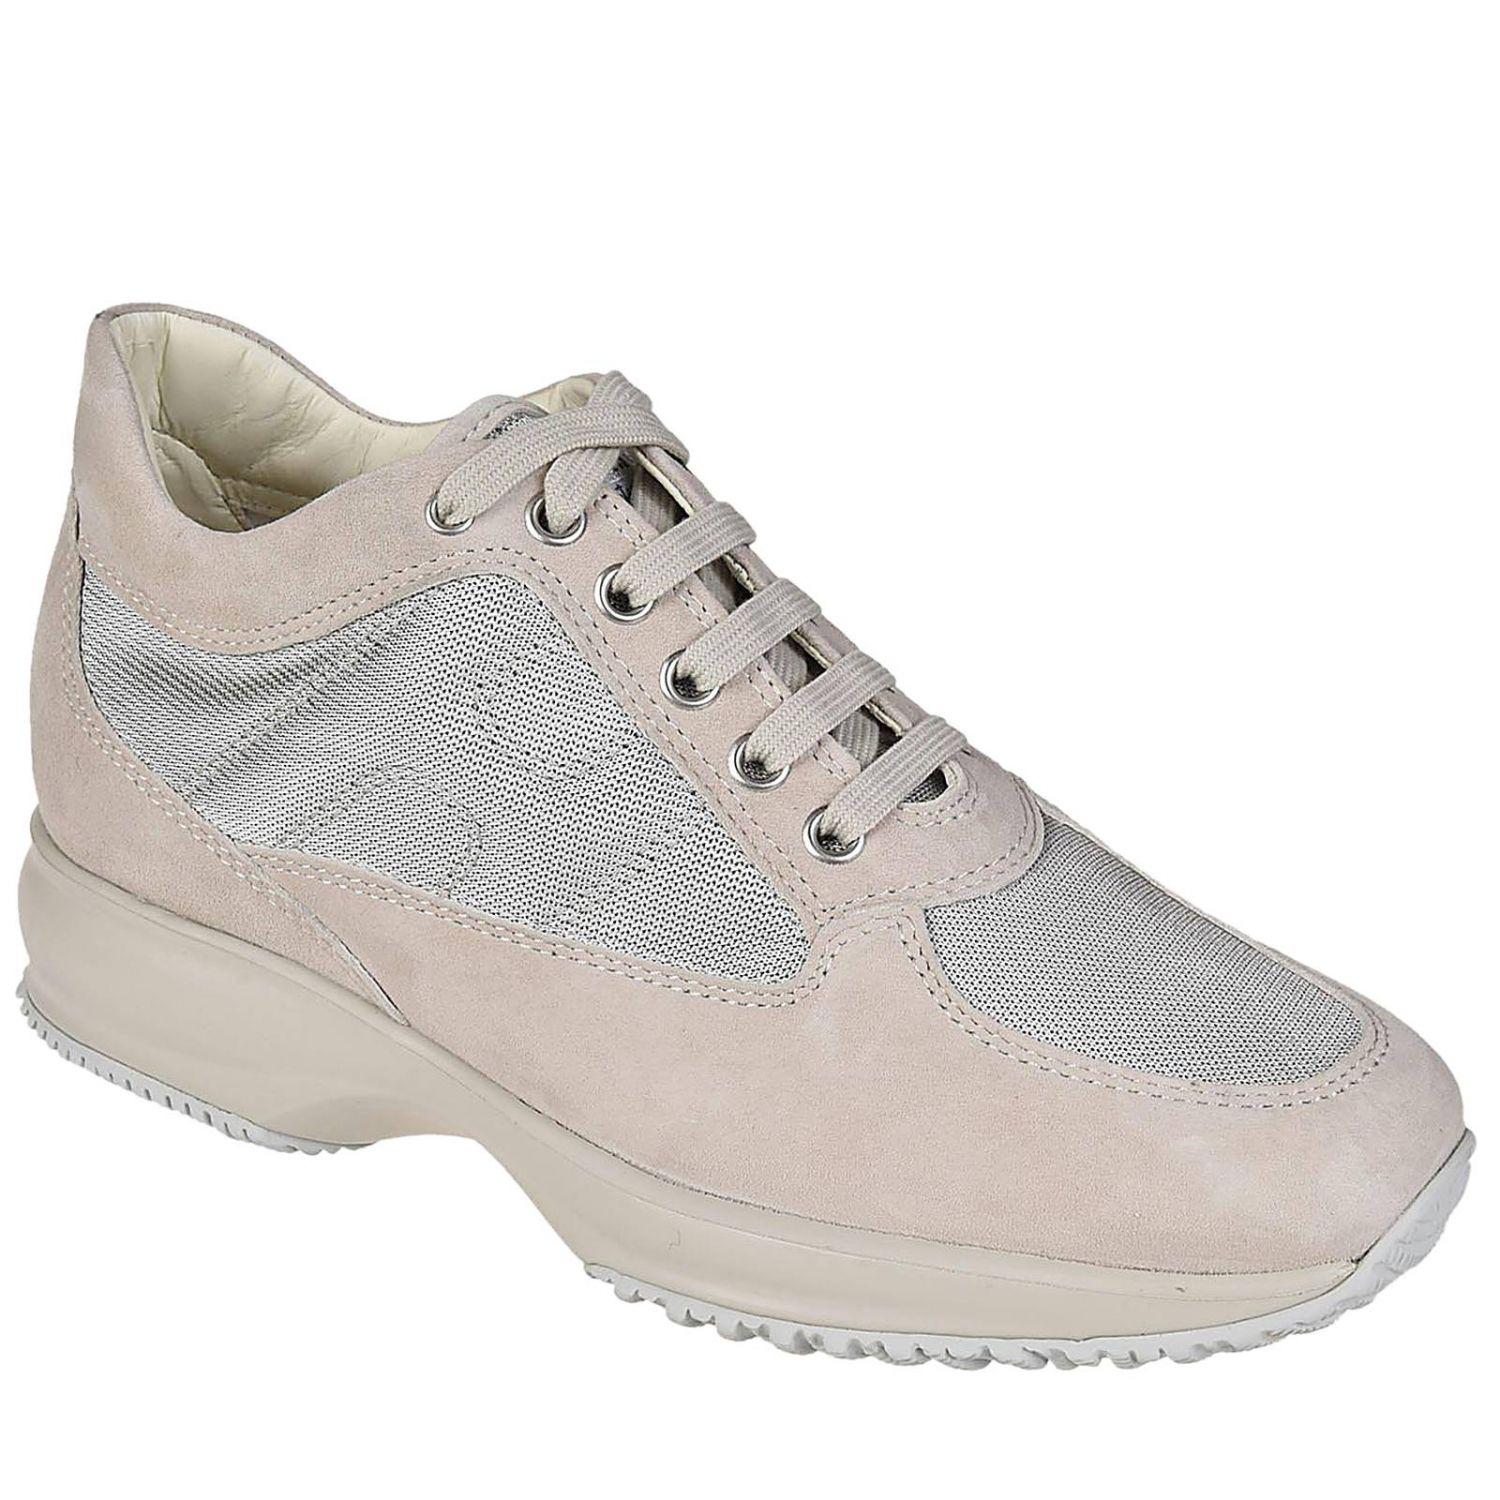 Hogan Leather Sneakers Shoes Women in Beige (Natural) - Lyst